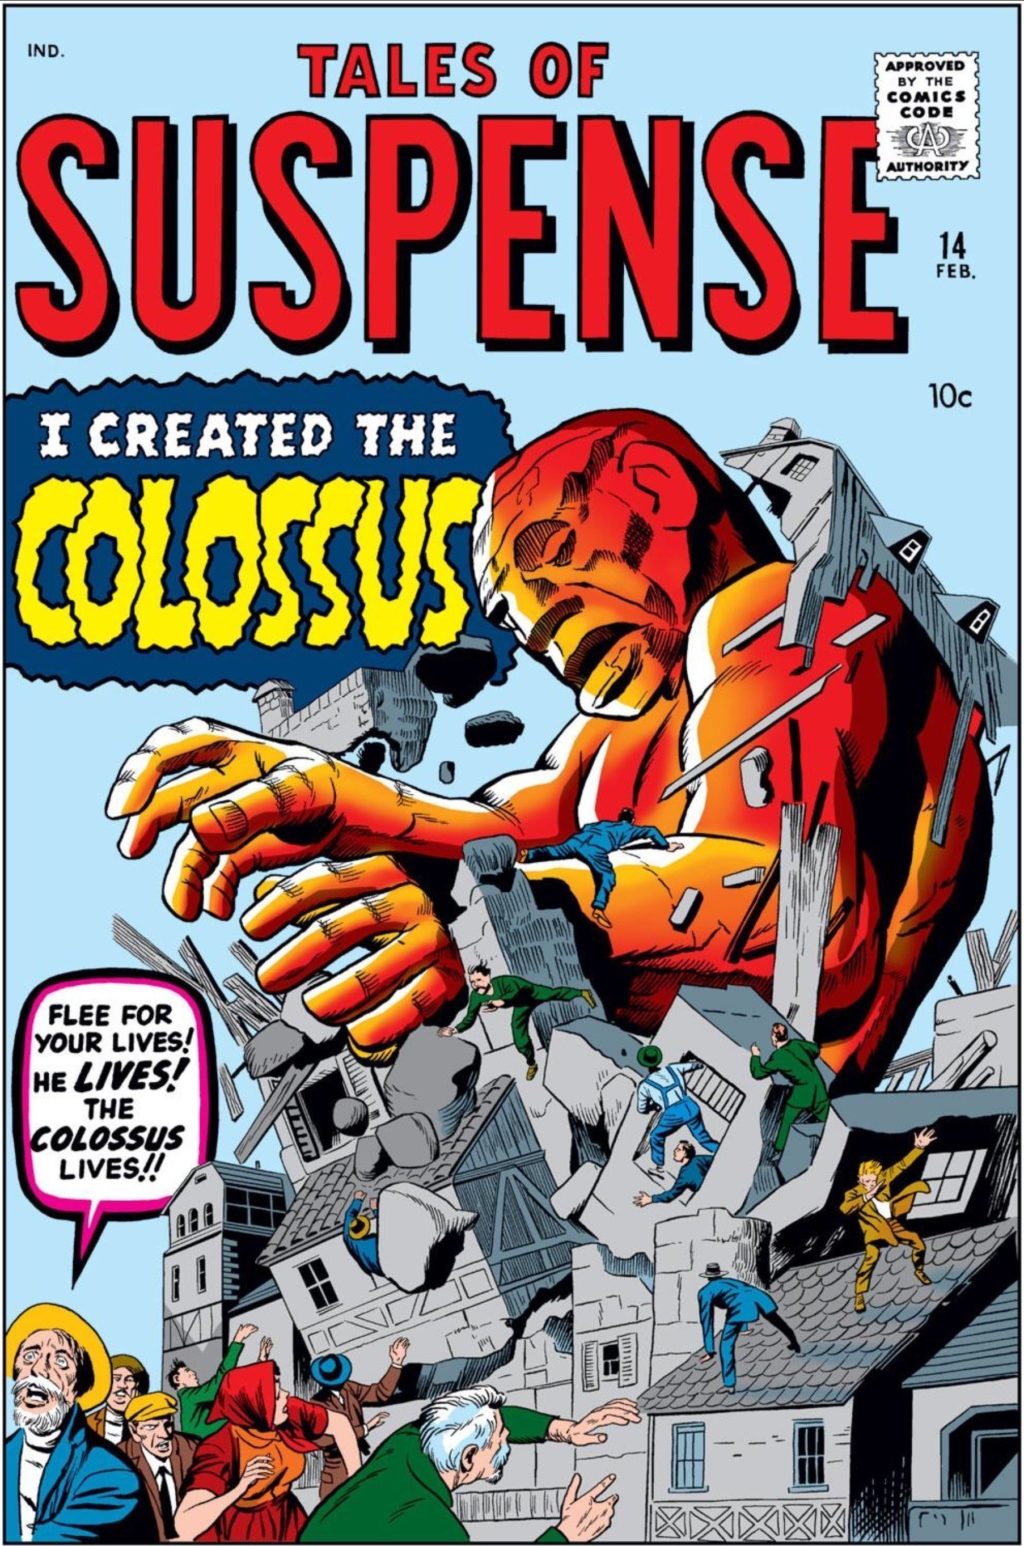 1961-colossus-monster